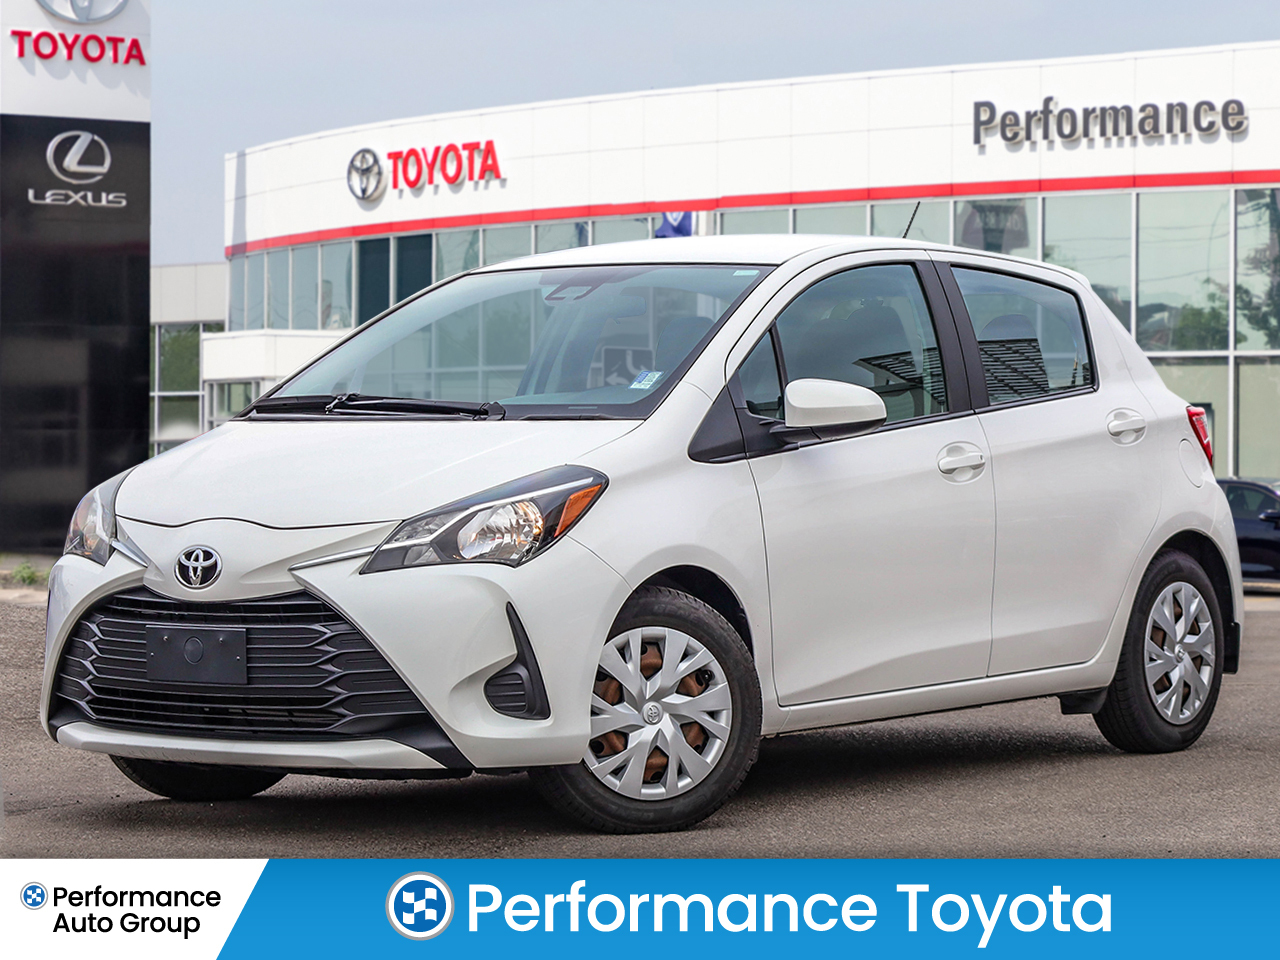 2018 Toyota Yaris LE, One Owner, Heated Seats, Toyota Safety Sense